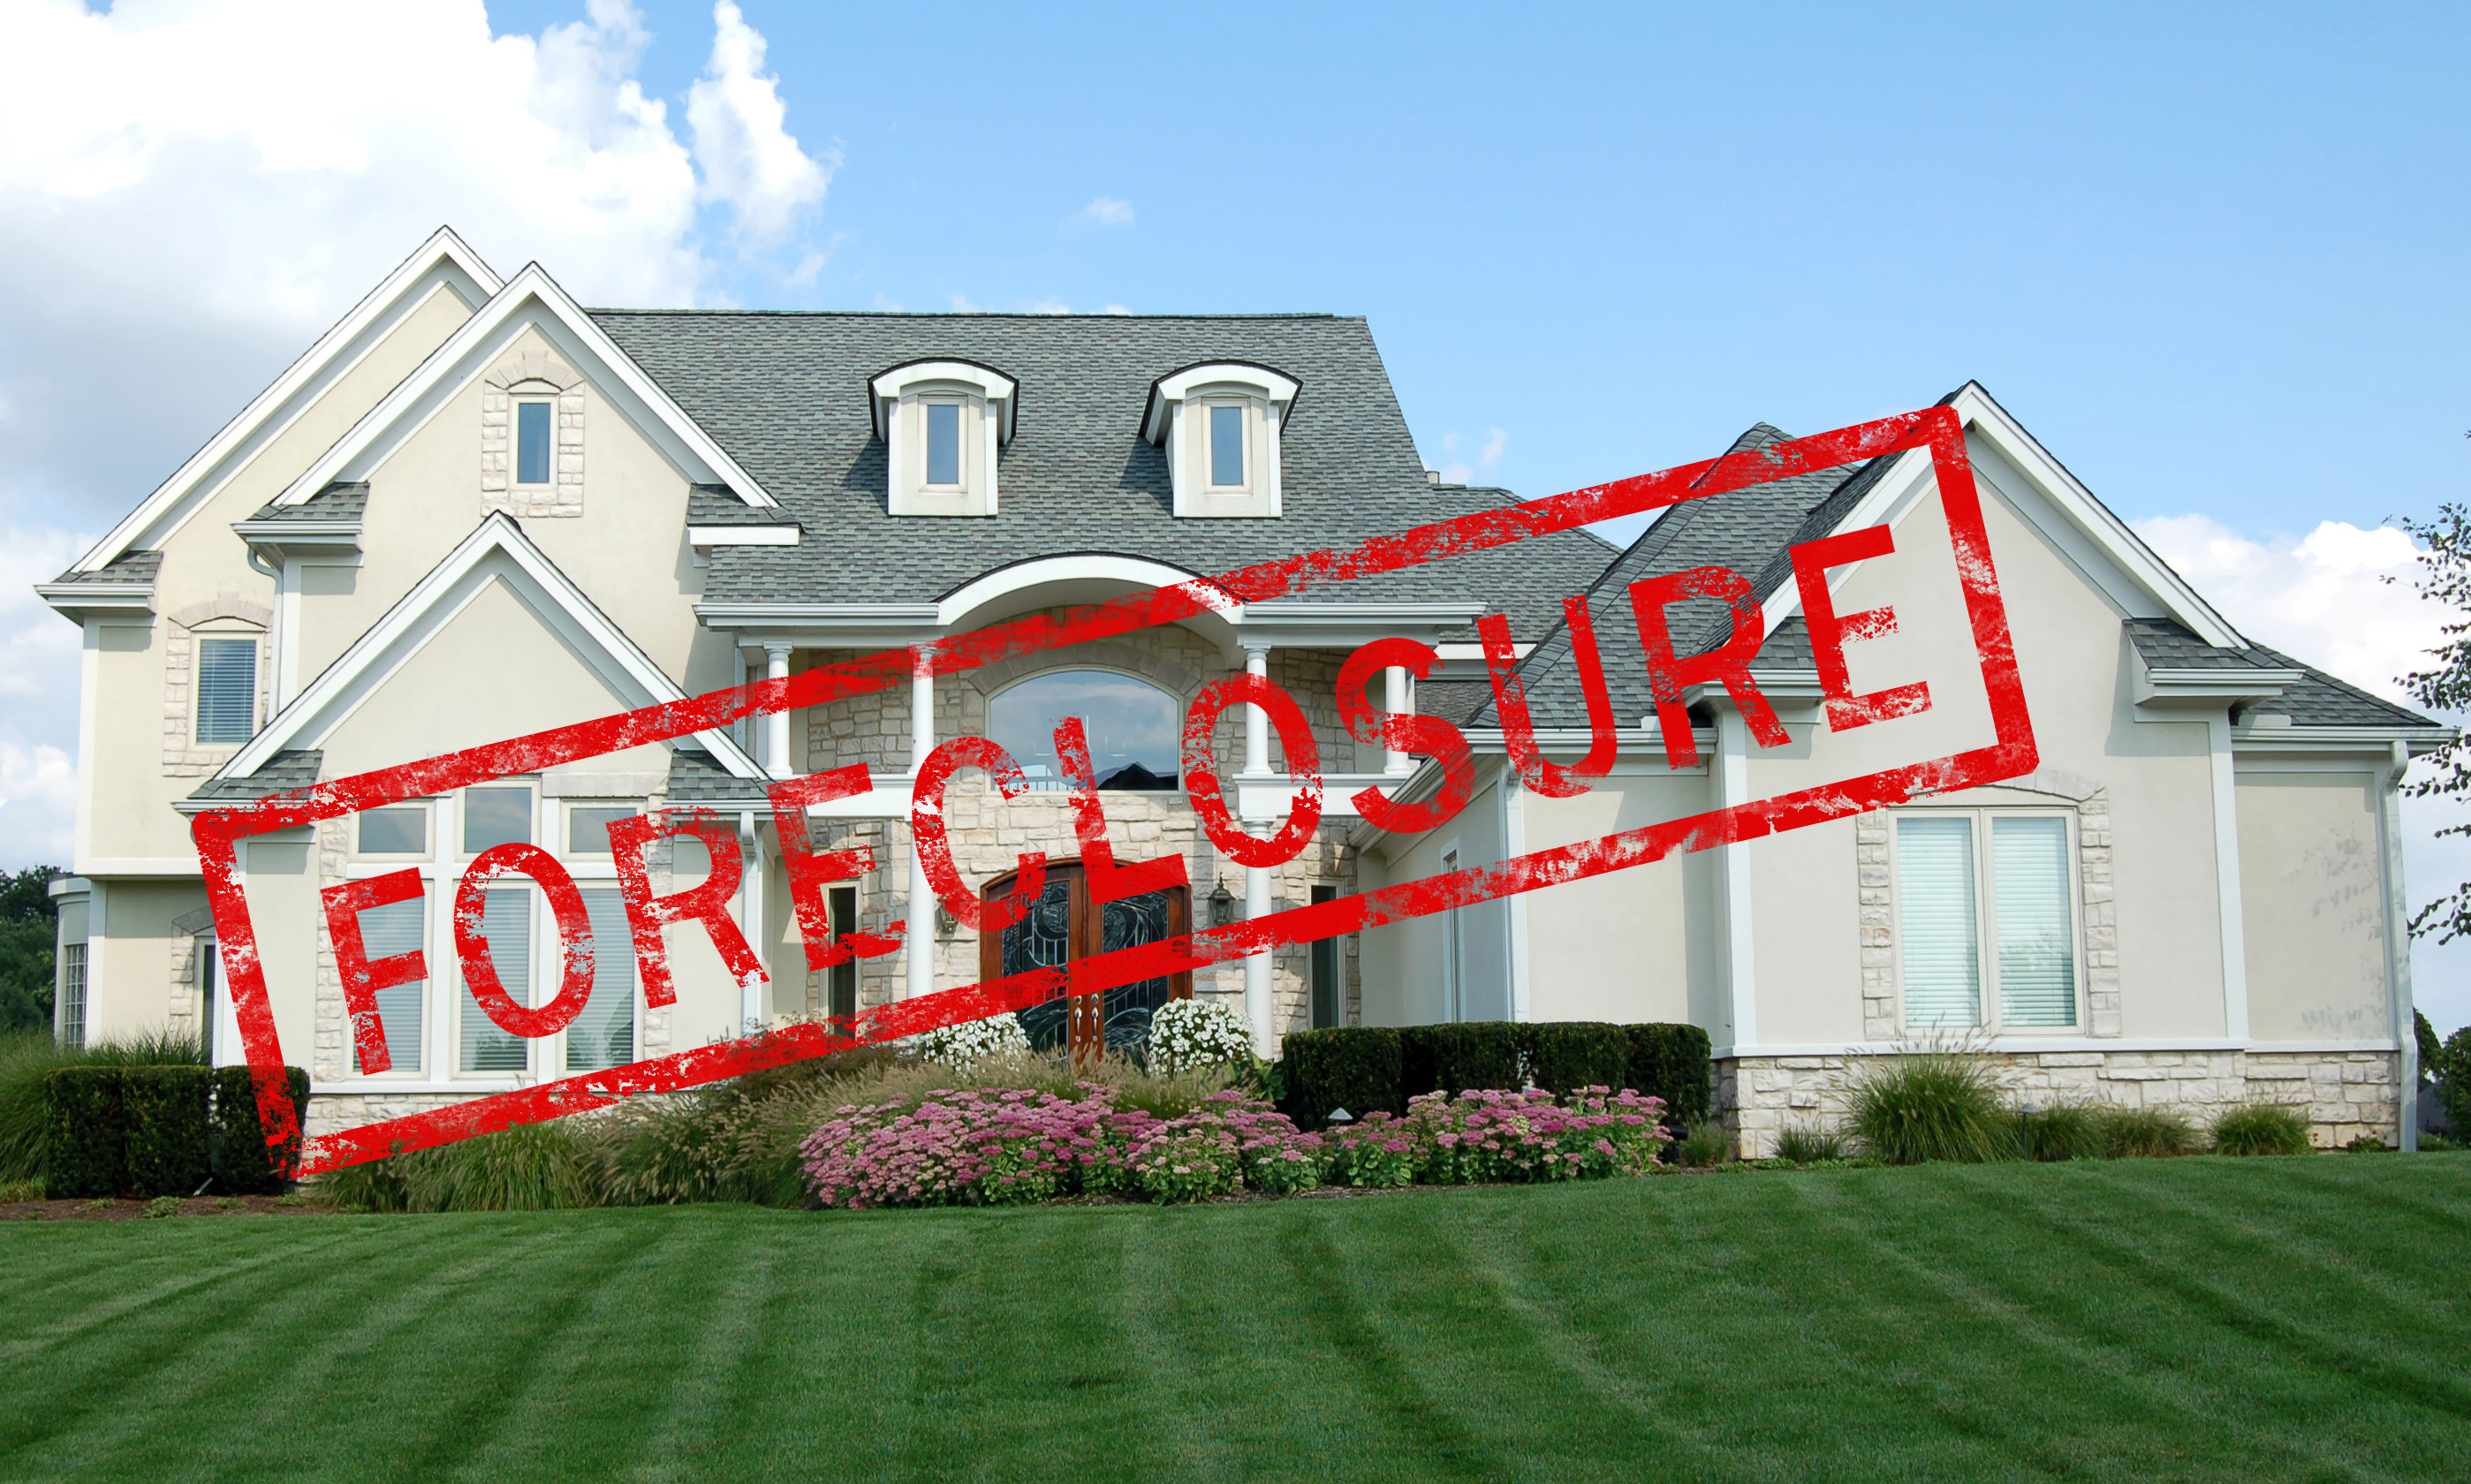 Call Canadian National Appraisers when you need valuations on  foreclosures